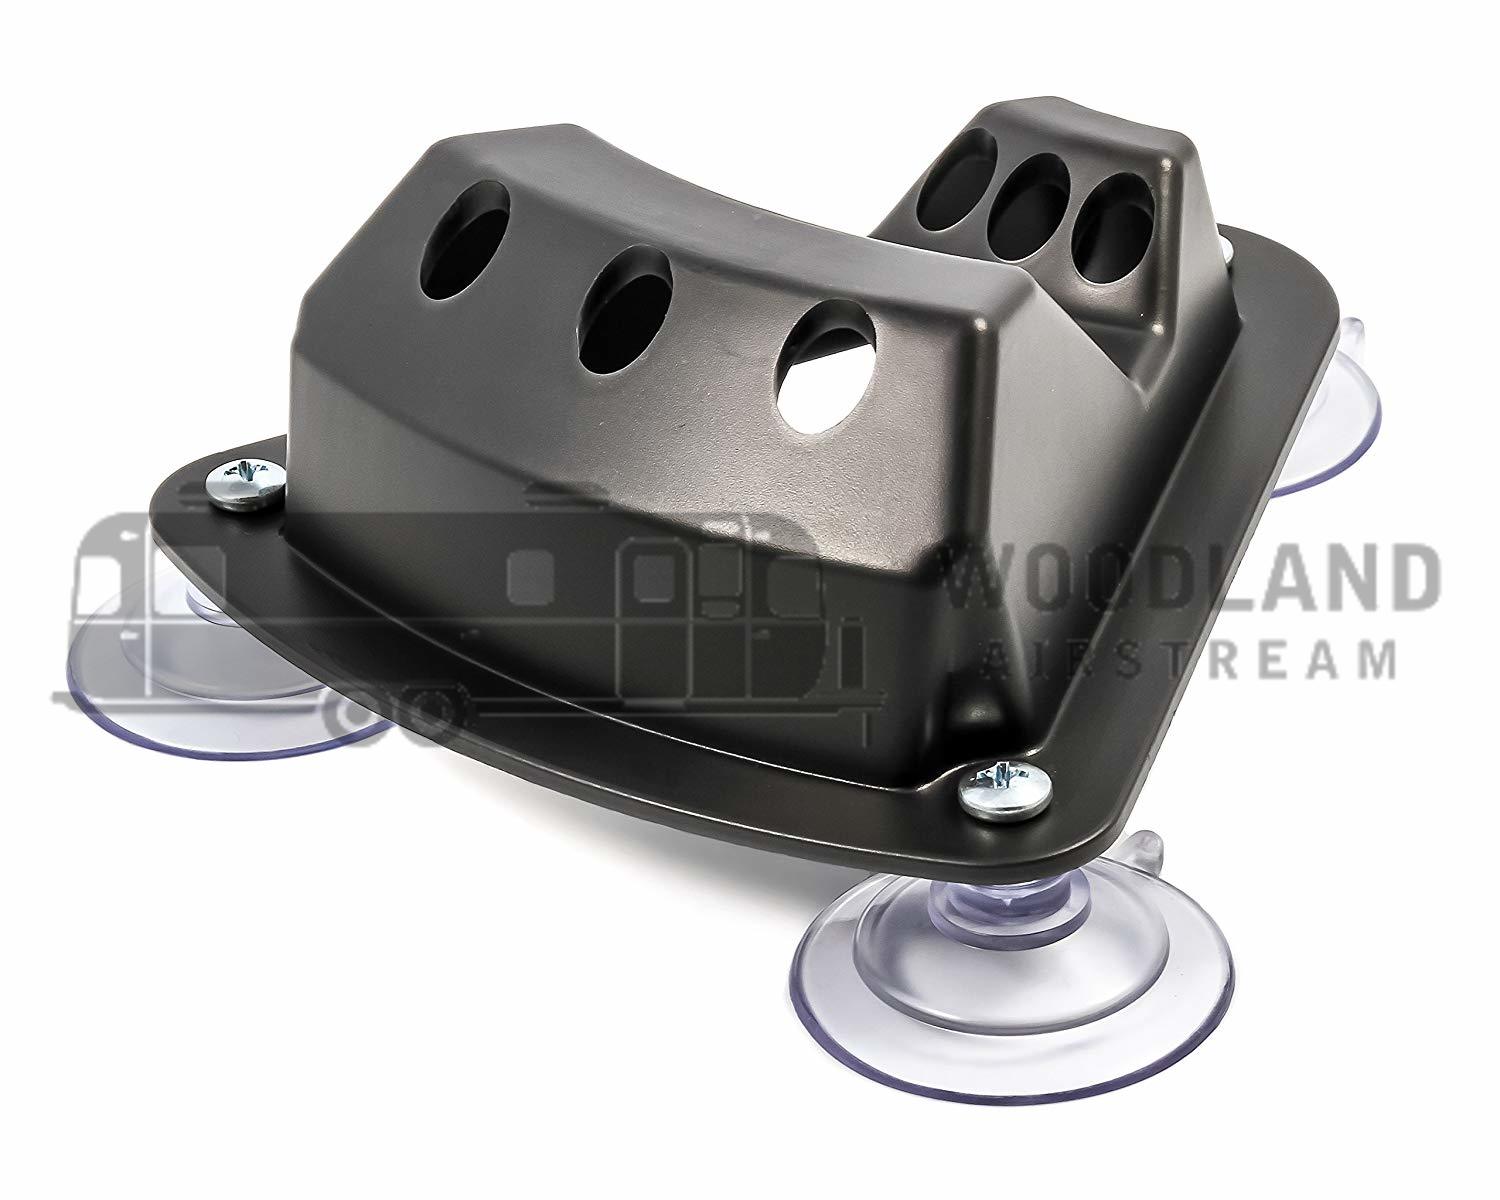 Camco 45506 Black Triple Flag Holder Suction Cup Mount